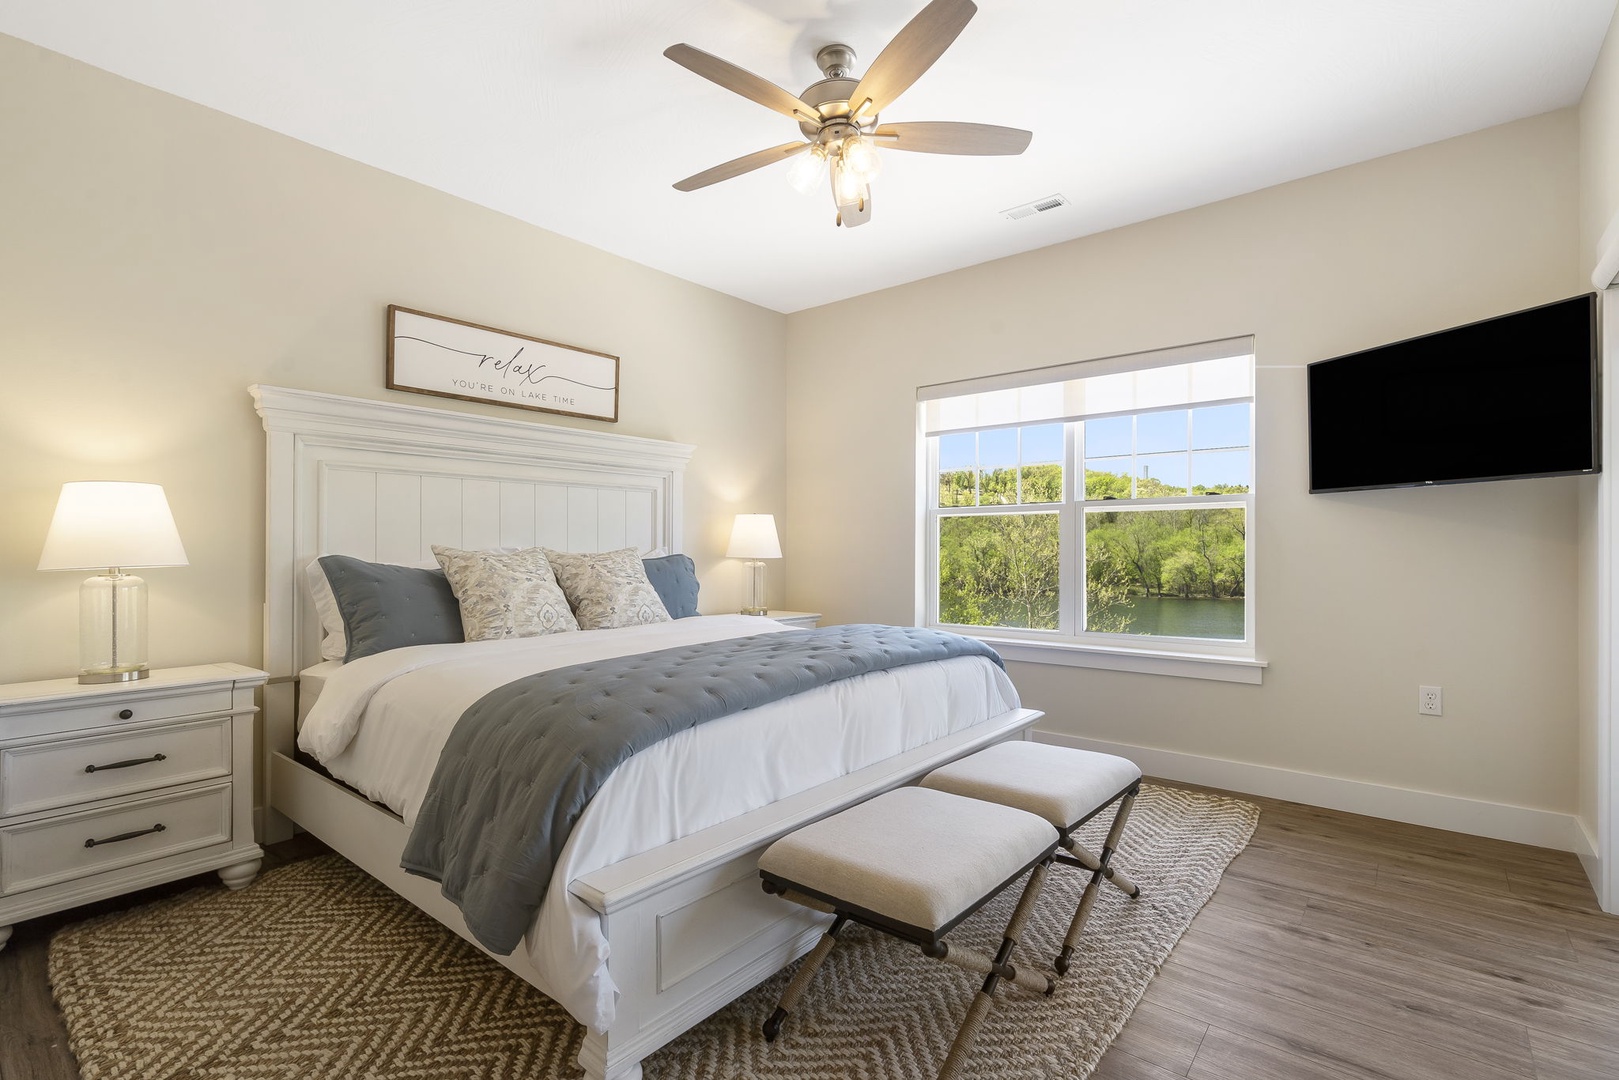 The Master Bedroom offers a King Bed, TV, En Suite Bathroom, and stunning lake views